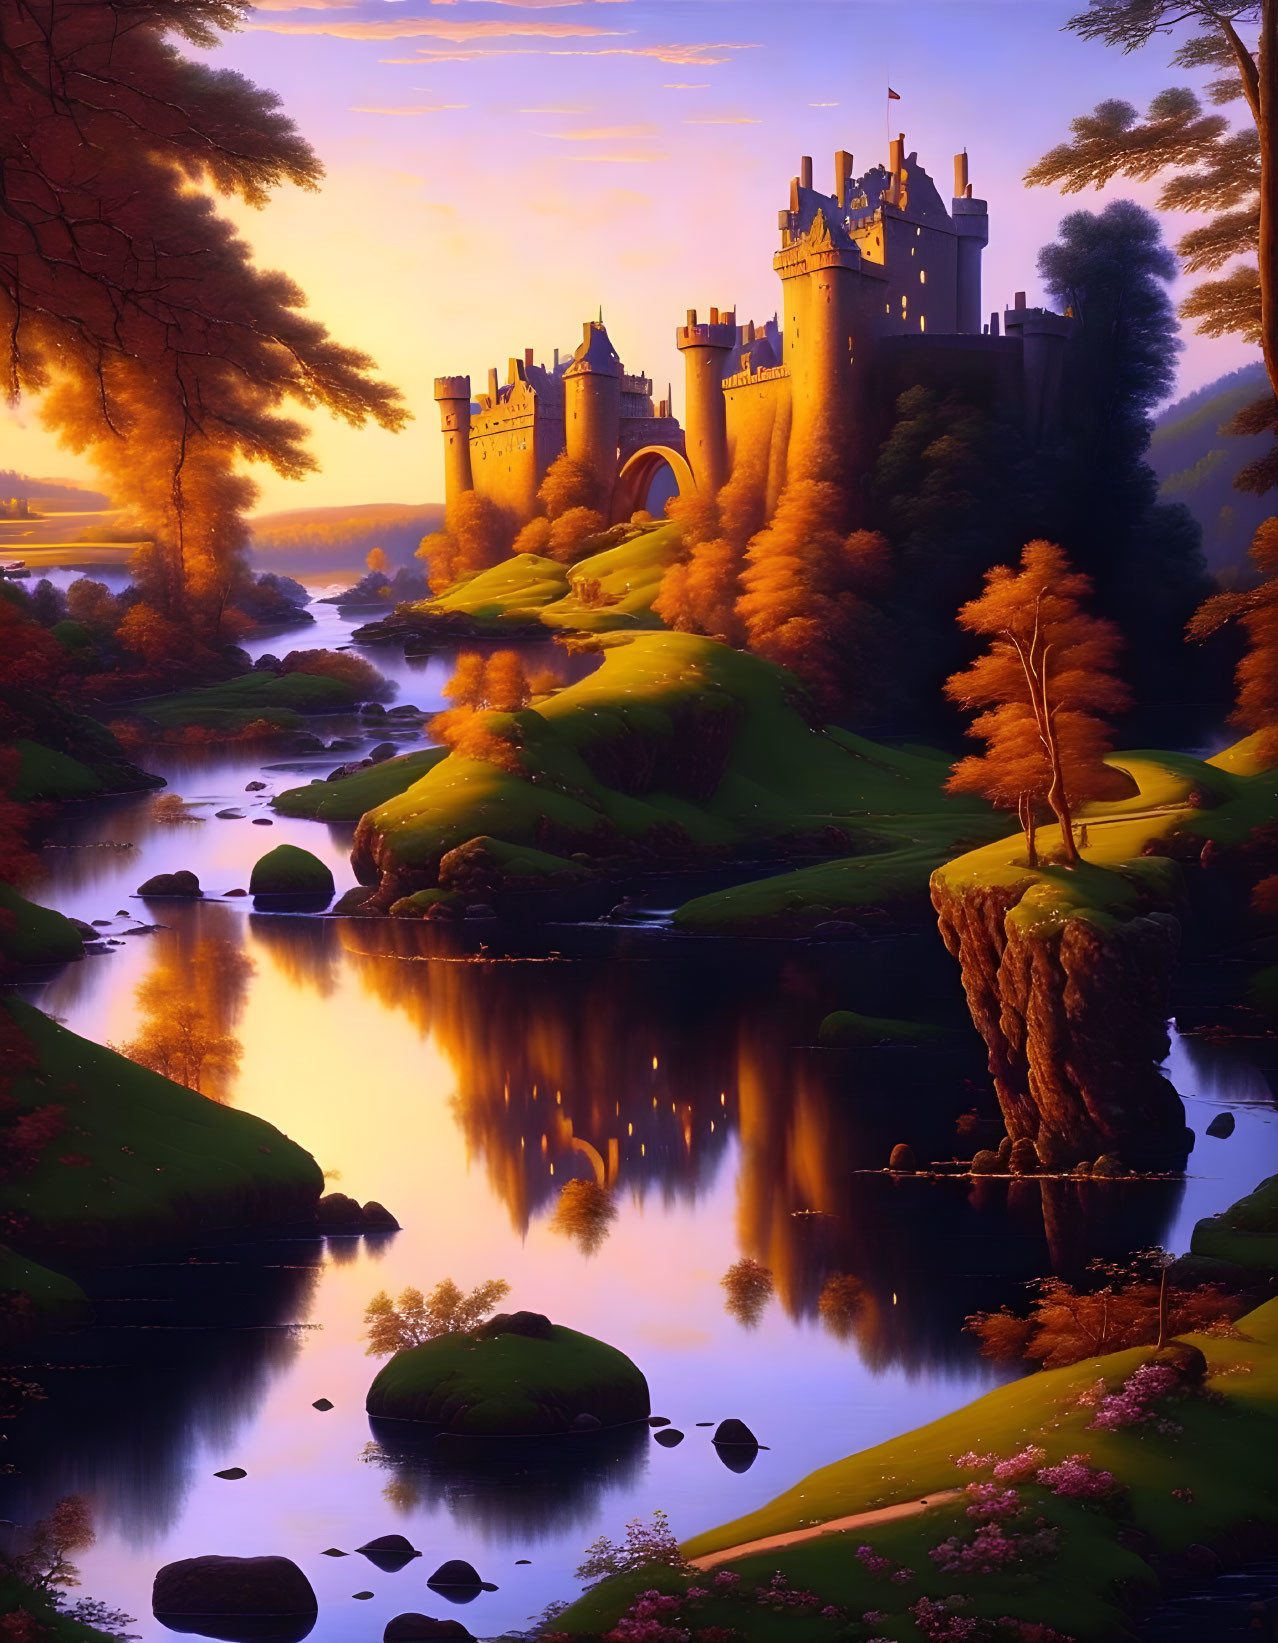 Majestic castle in lush autumn landscape with river and sunset